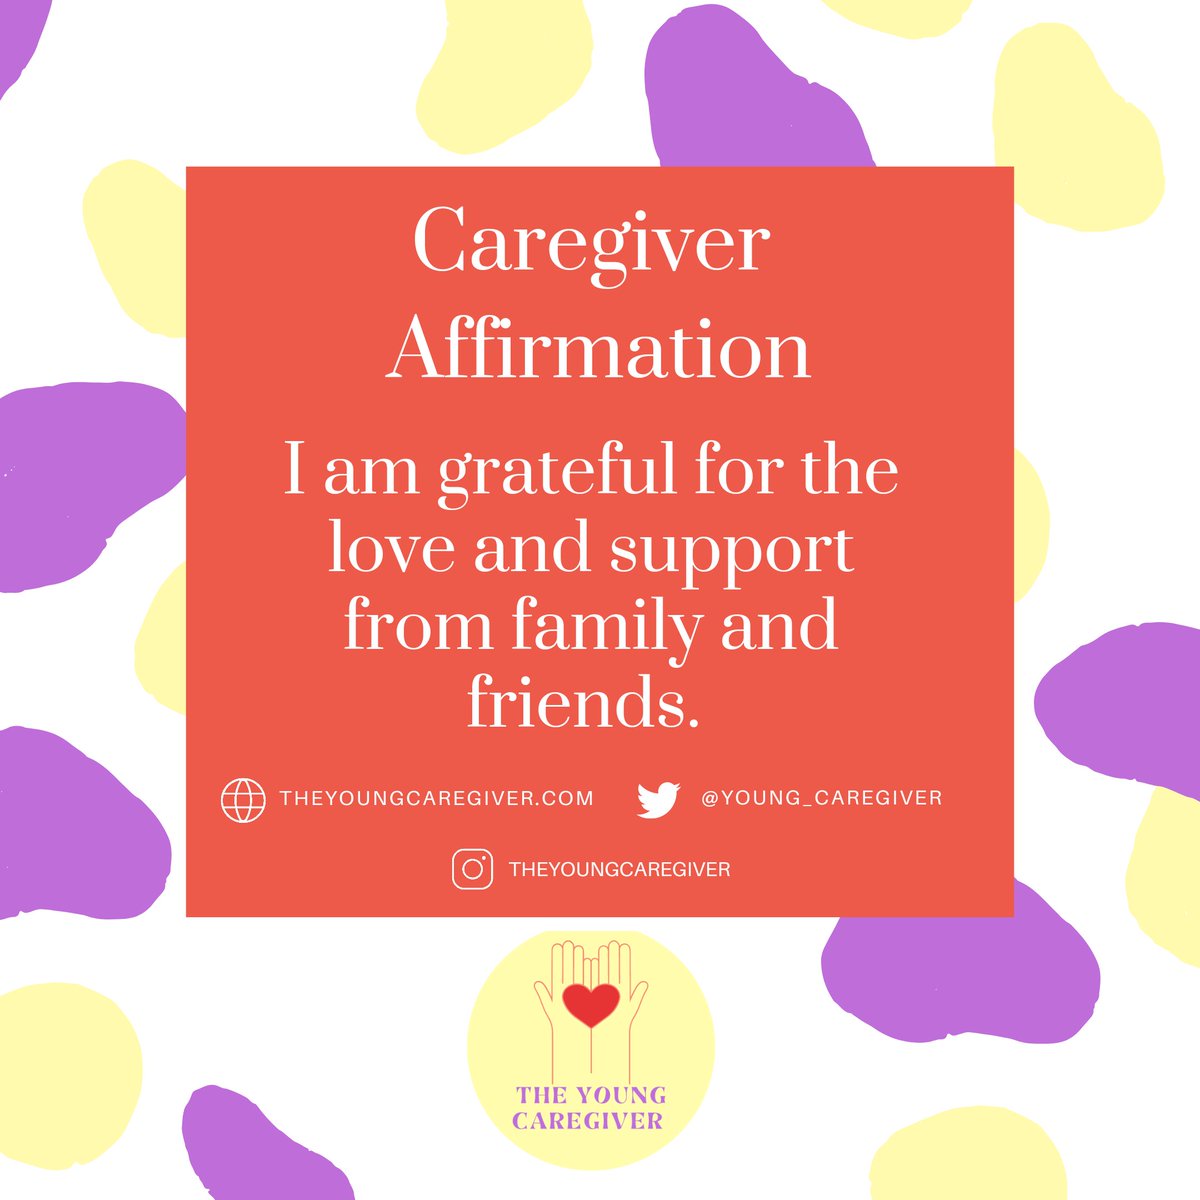 If you have a village appreciate your village. Your village can consist of paid or unpaid help. I still keep in contact with a few of the caregivers that helped with my parents. #theyoungcaregiver #caregiver #selflove #selfcare #caregiveraffirmations #respitecare